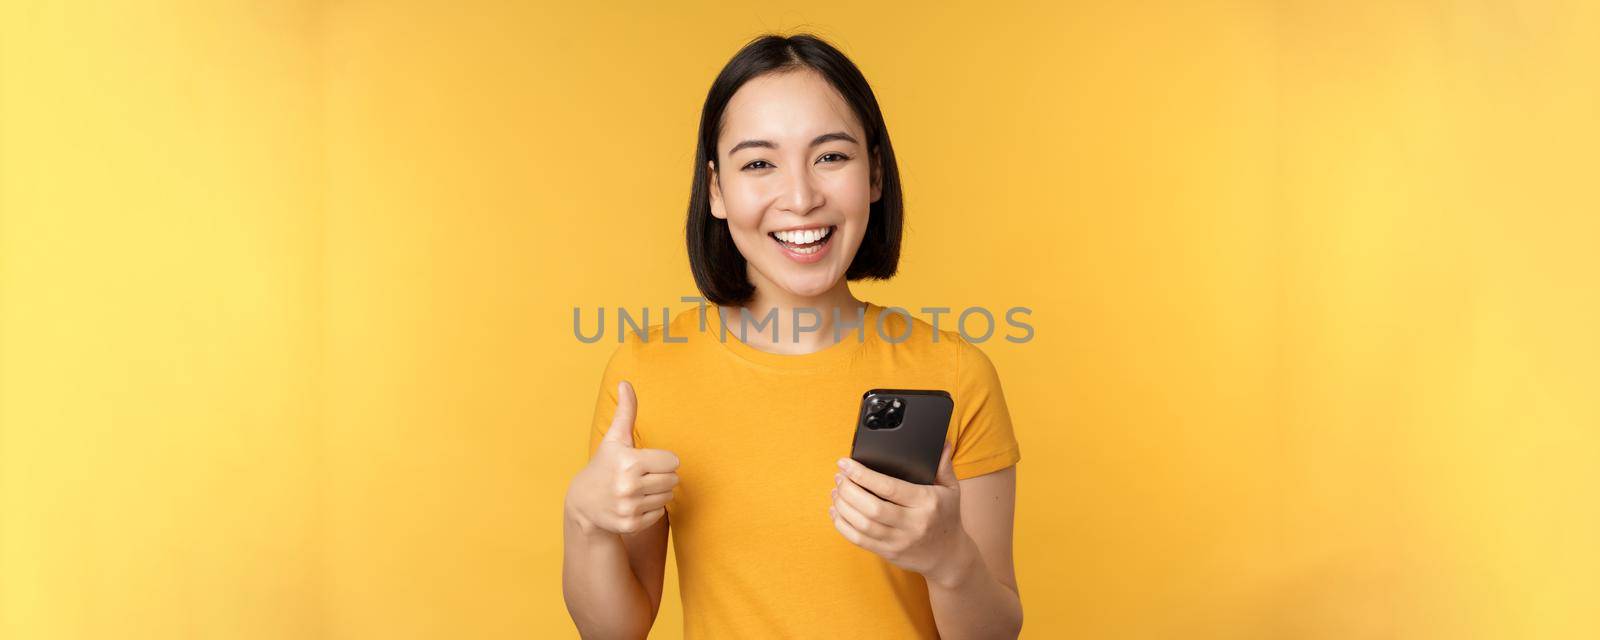 Happy smiling asian girl holding mobile phone and showing thumbs up, recommending application on smartphone, standing over yellow background.